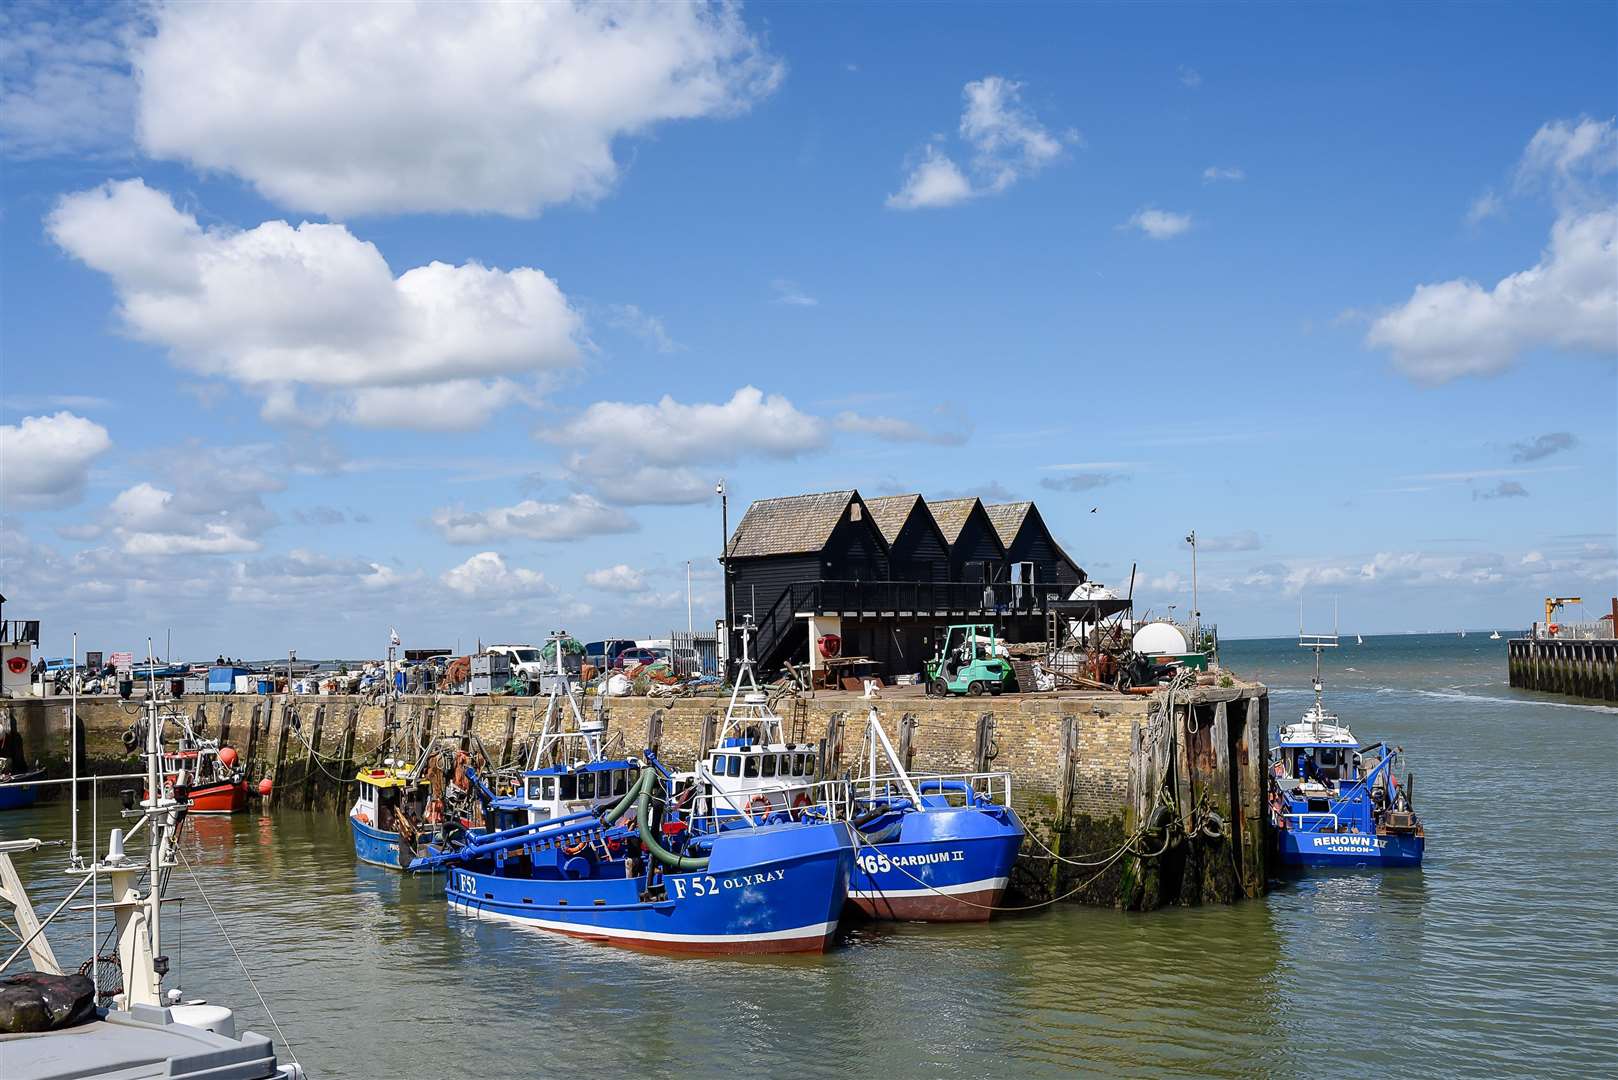 Whitstable is perfect for those looking for a staycation - offering multiple pubs, seafood restaurants, a beautiful pebble beach and a picturesque working harbour. Picture: Alan Langley